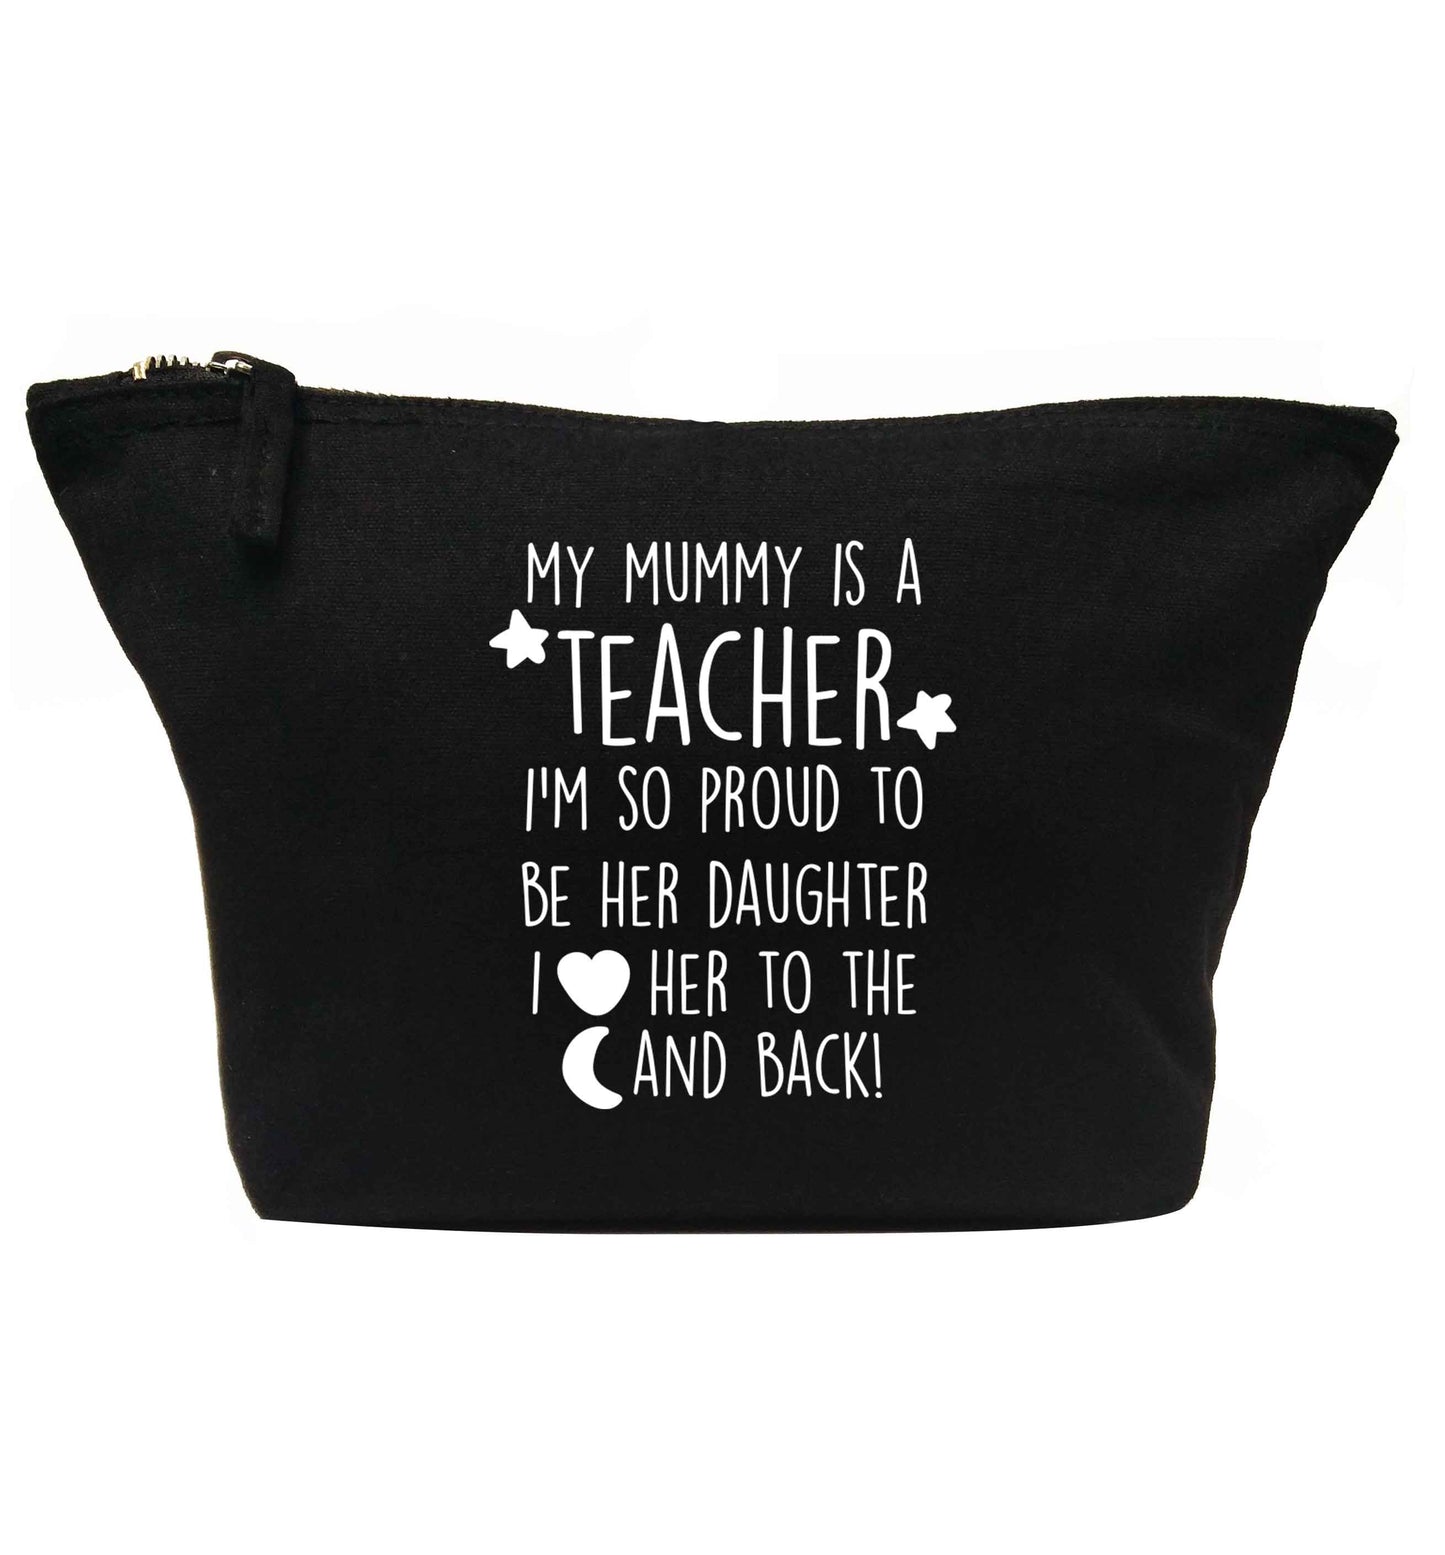 My mummy is a teacher I'm so proud to be her daughter I love her to the moon and back | Makeup / wash bag